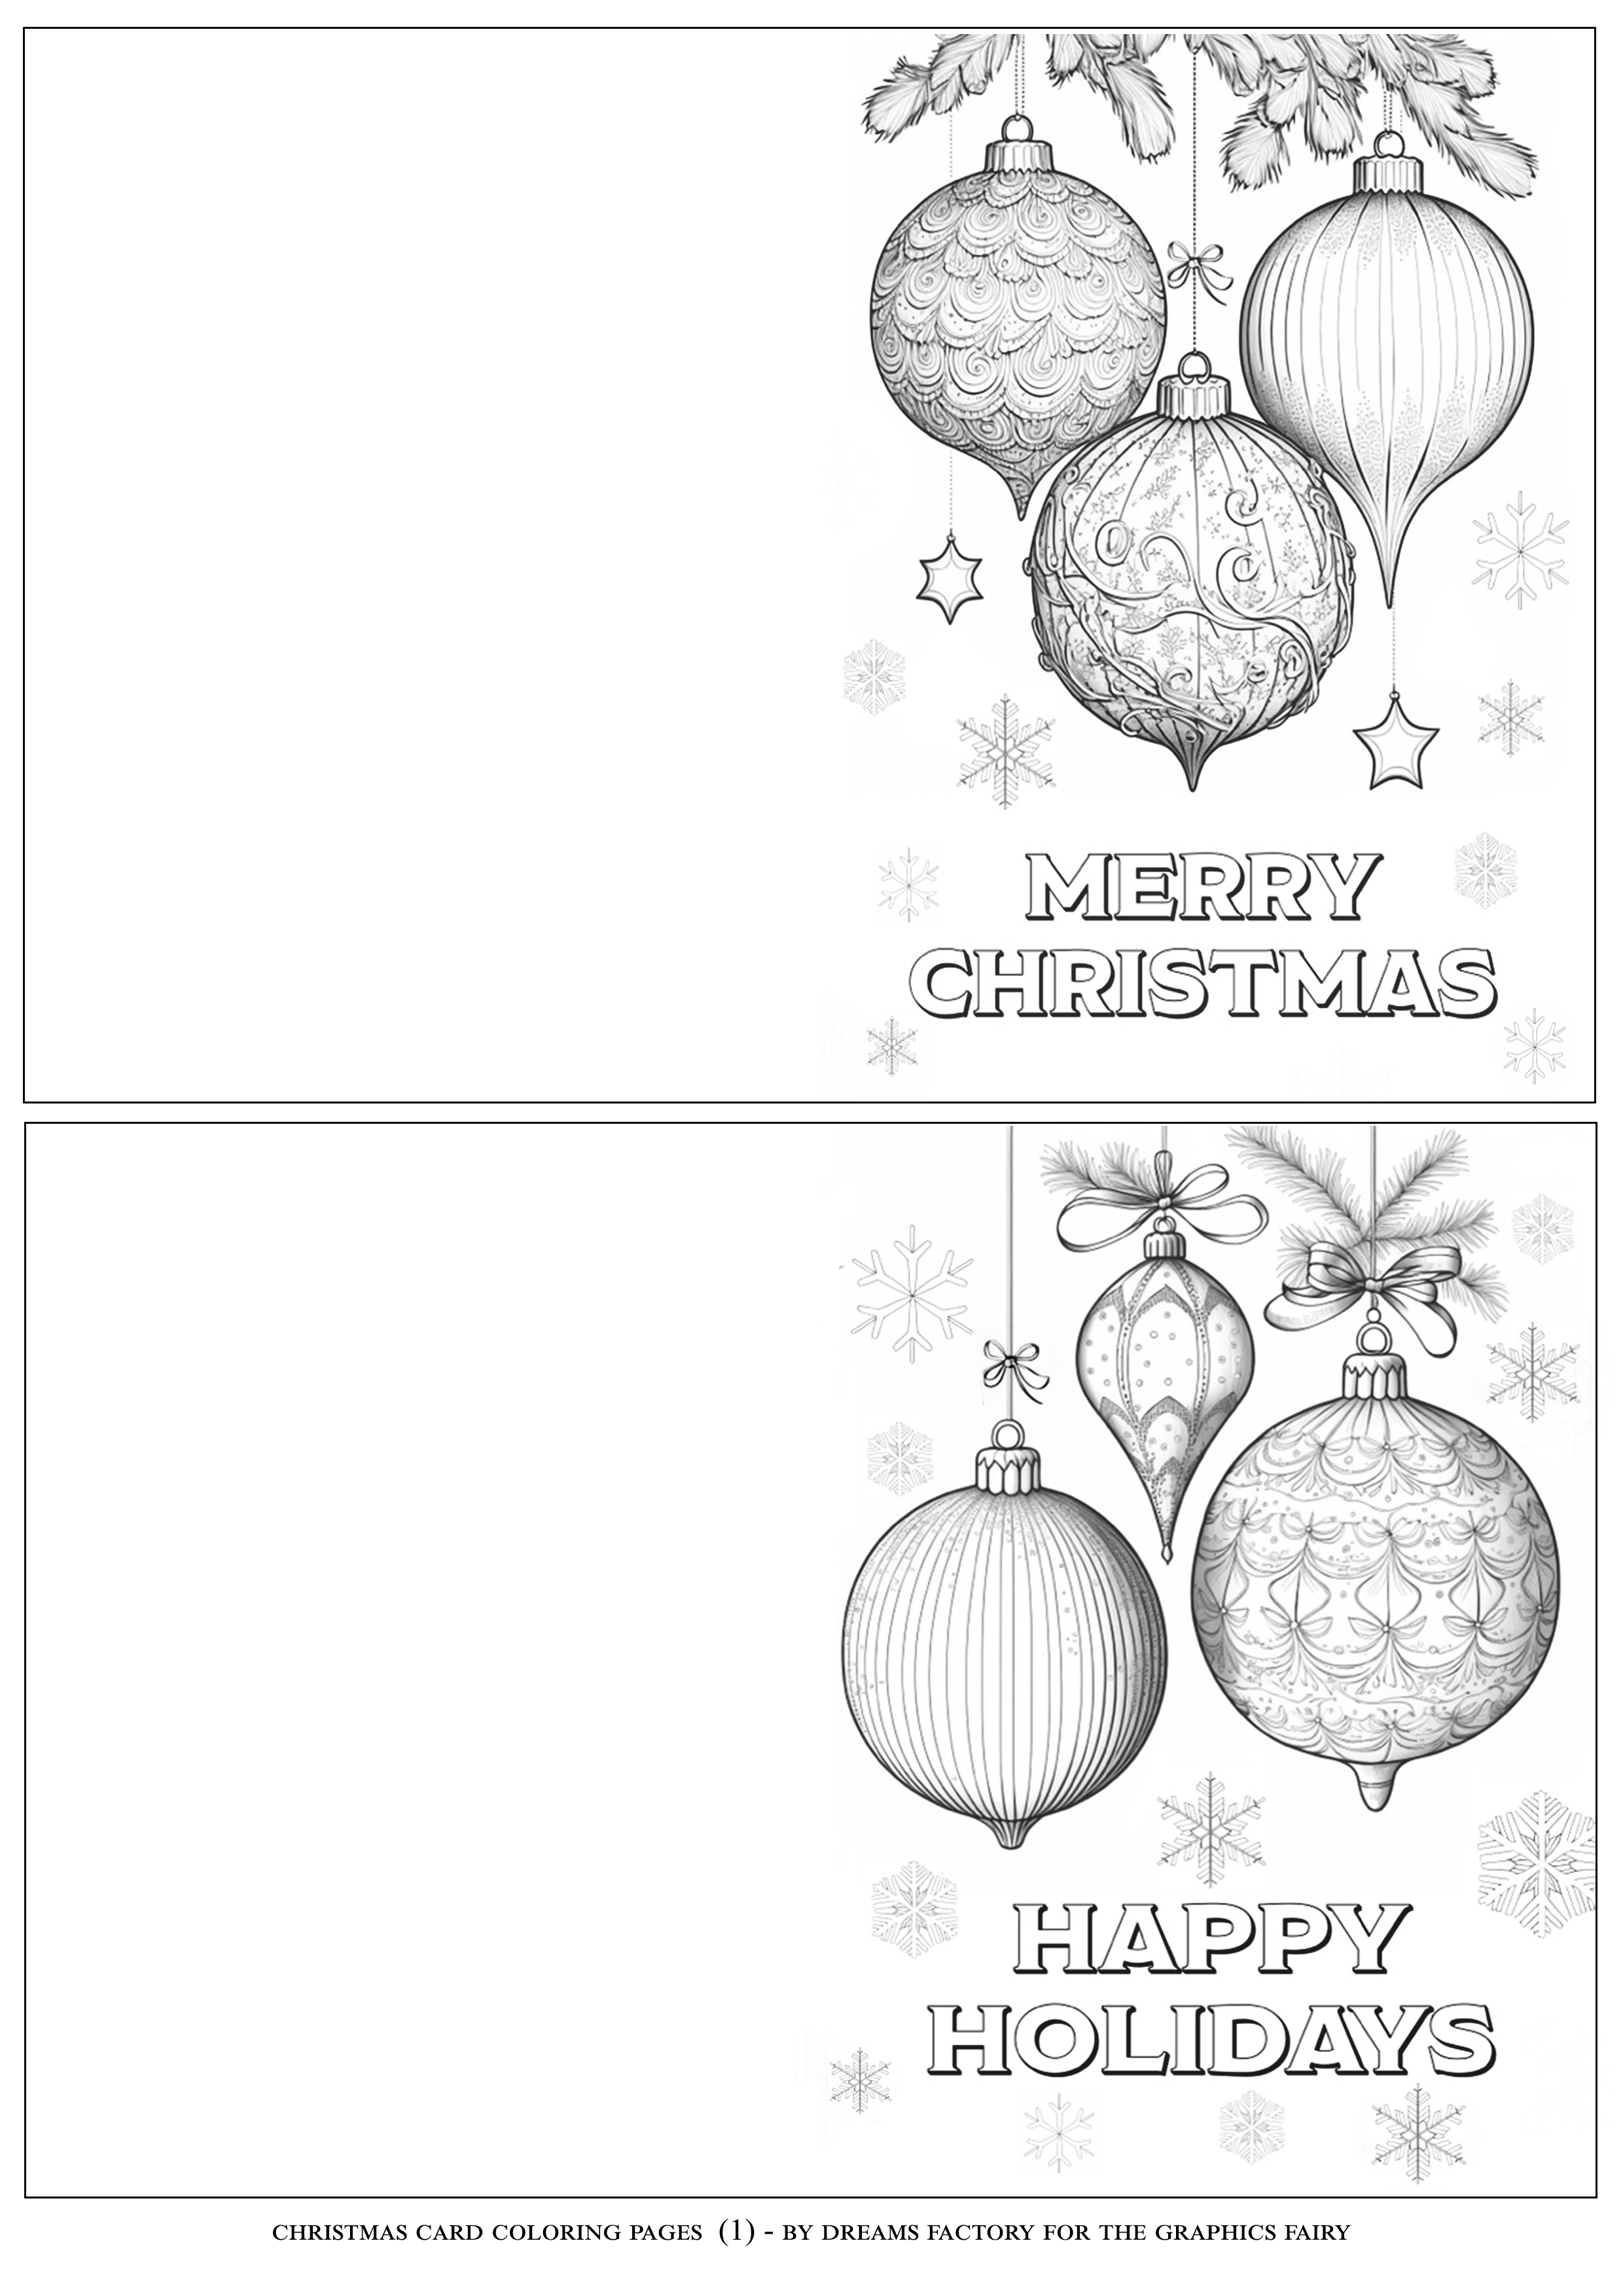 Christmas card coloring pages 1